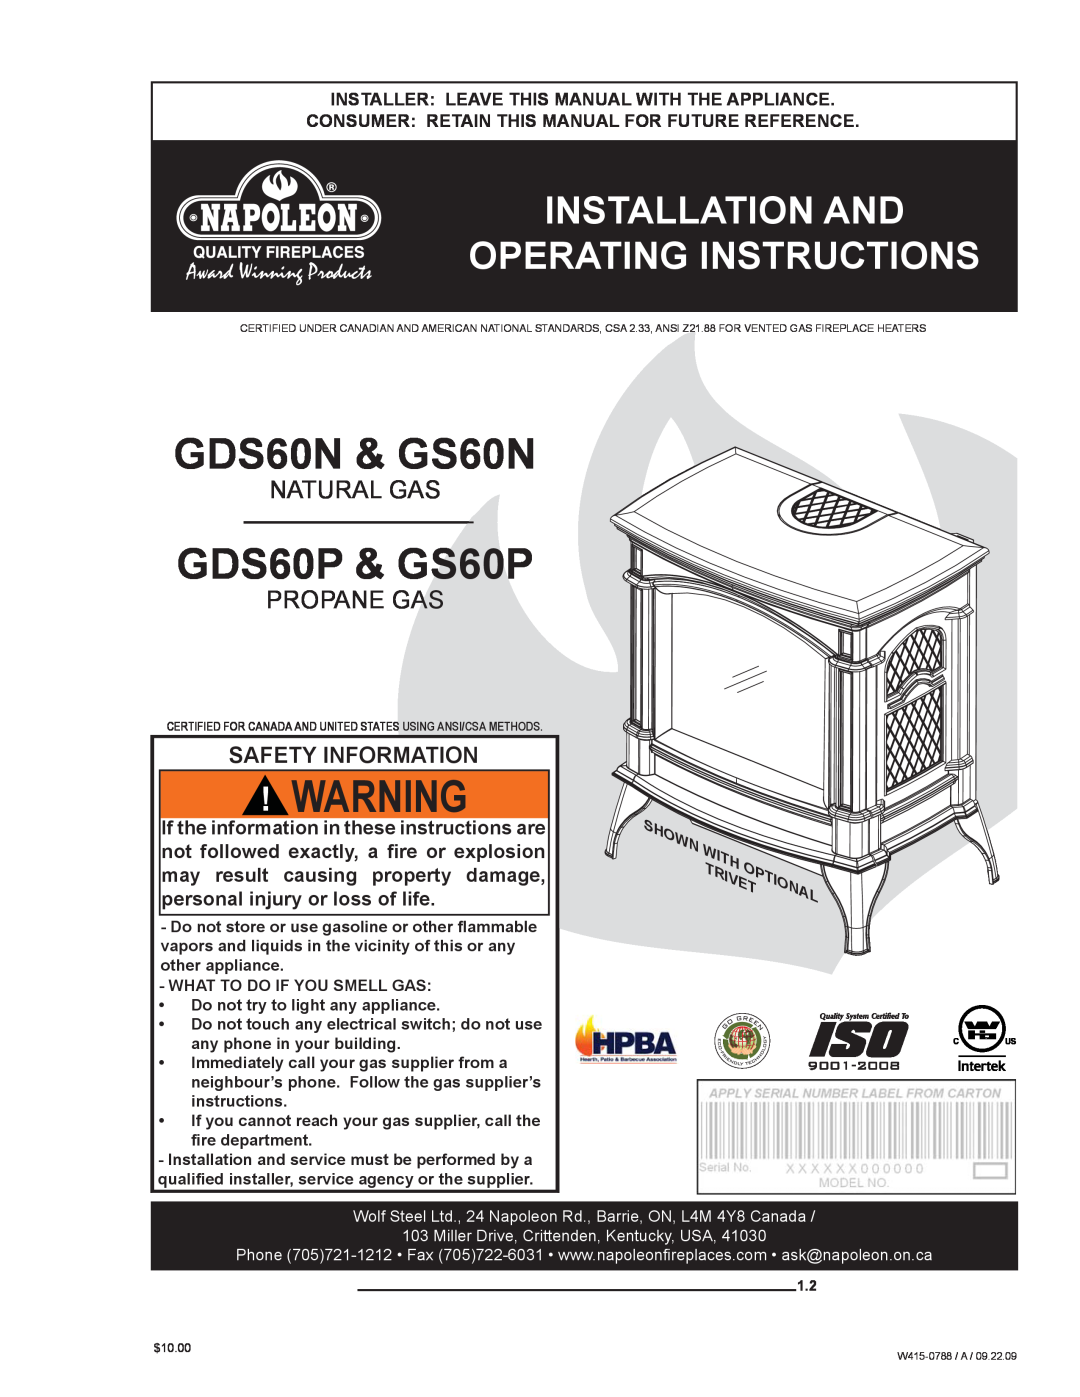 Napoleon Fireplaces manual Natural Gas, Propane Gas, Trivet, GDS60N & GS60N, GDS60P & GS60P, Safety Information 